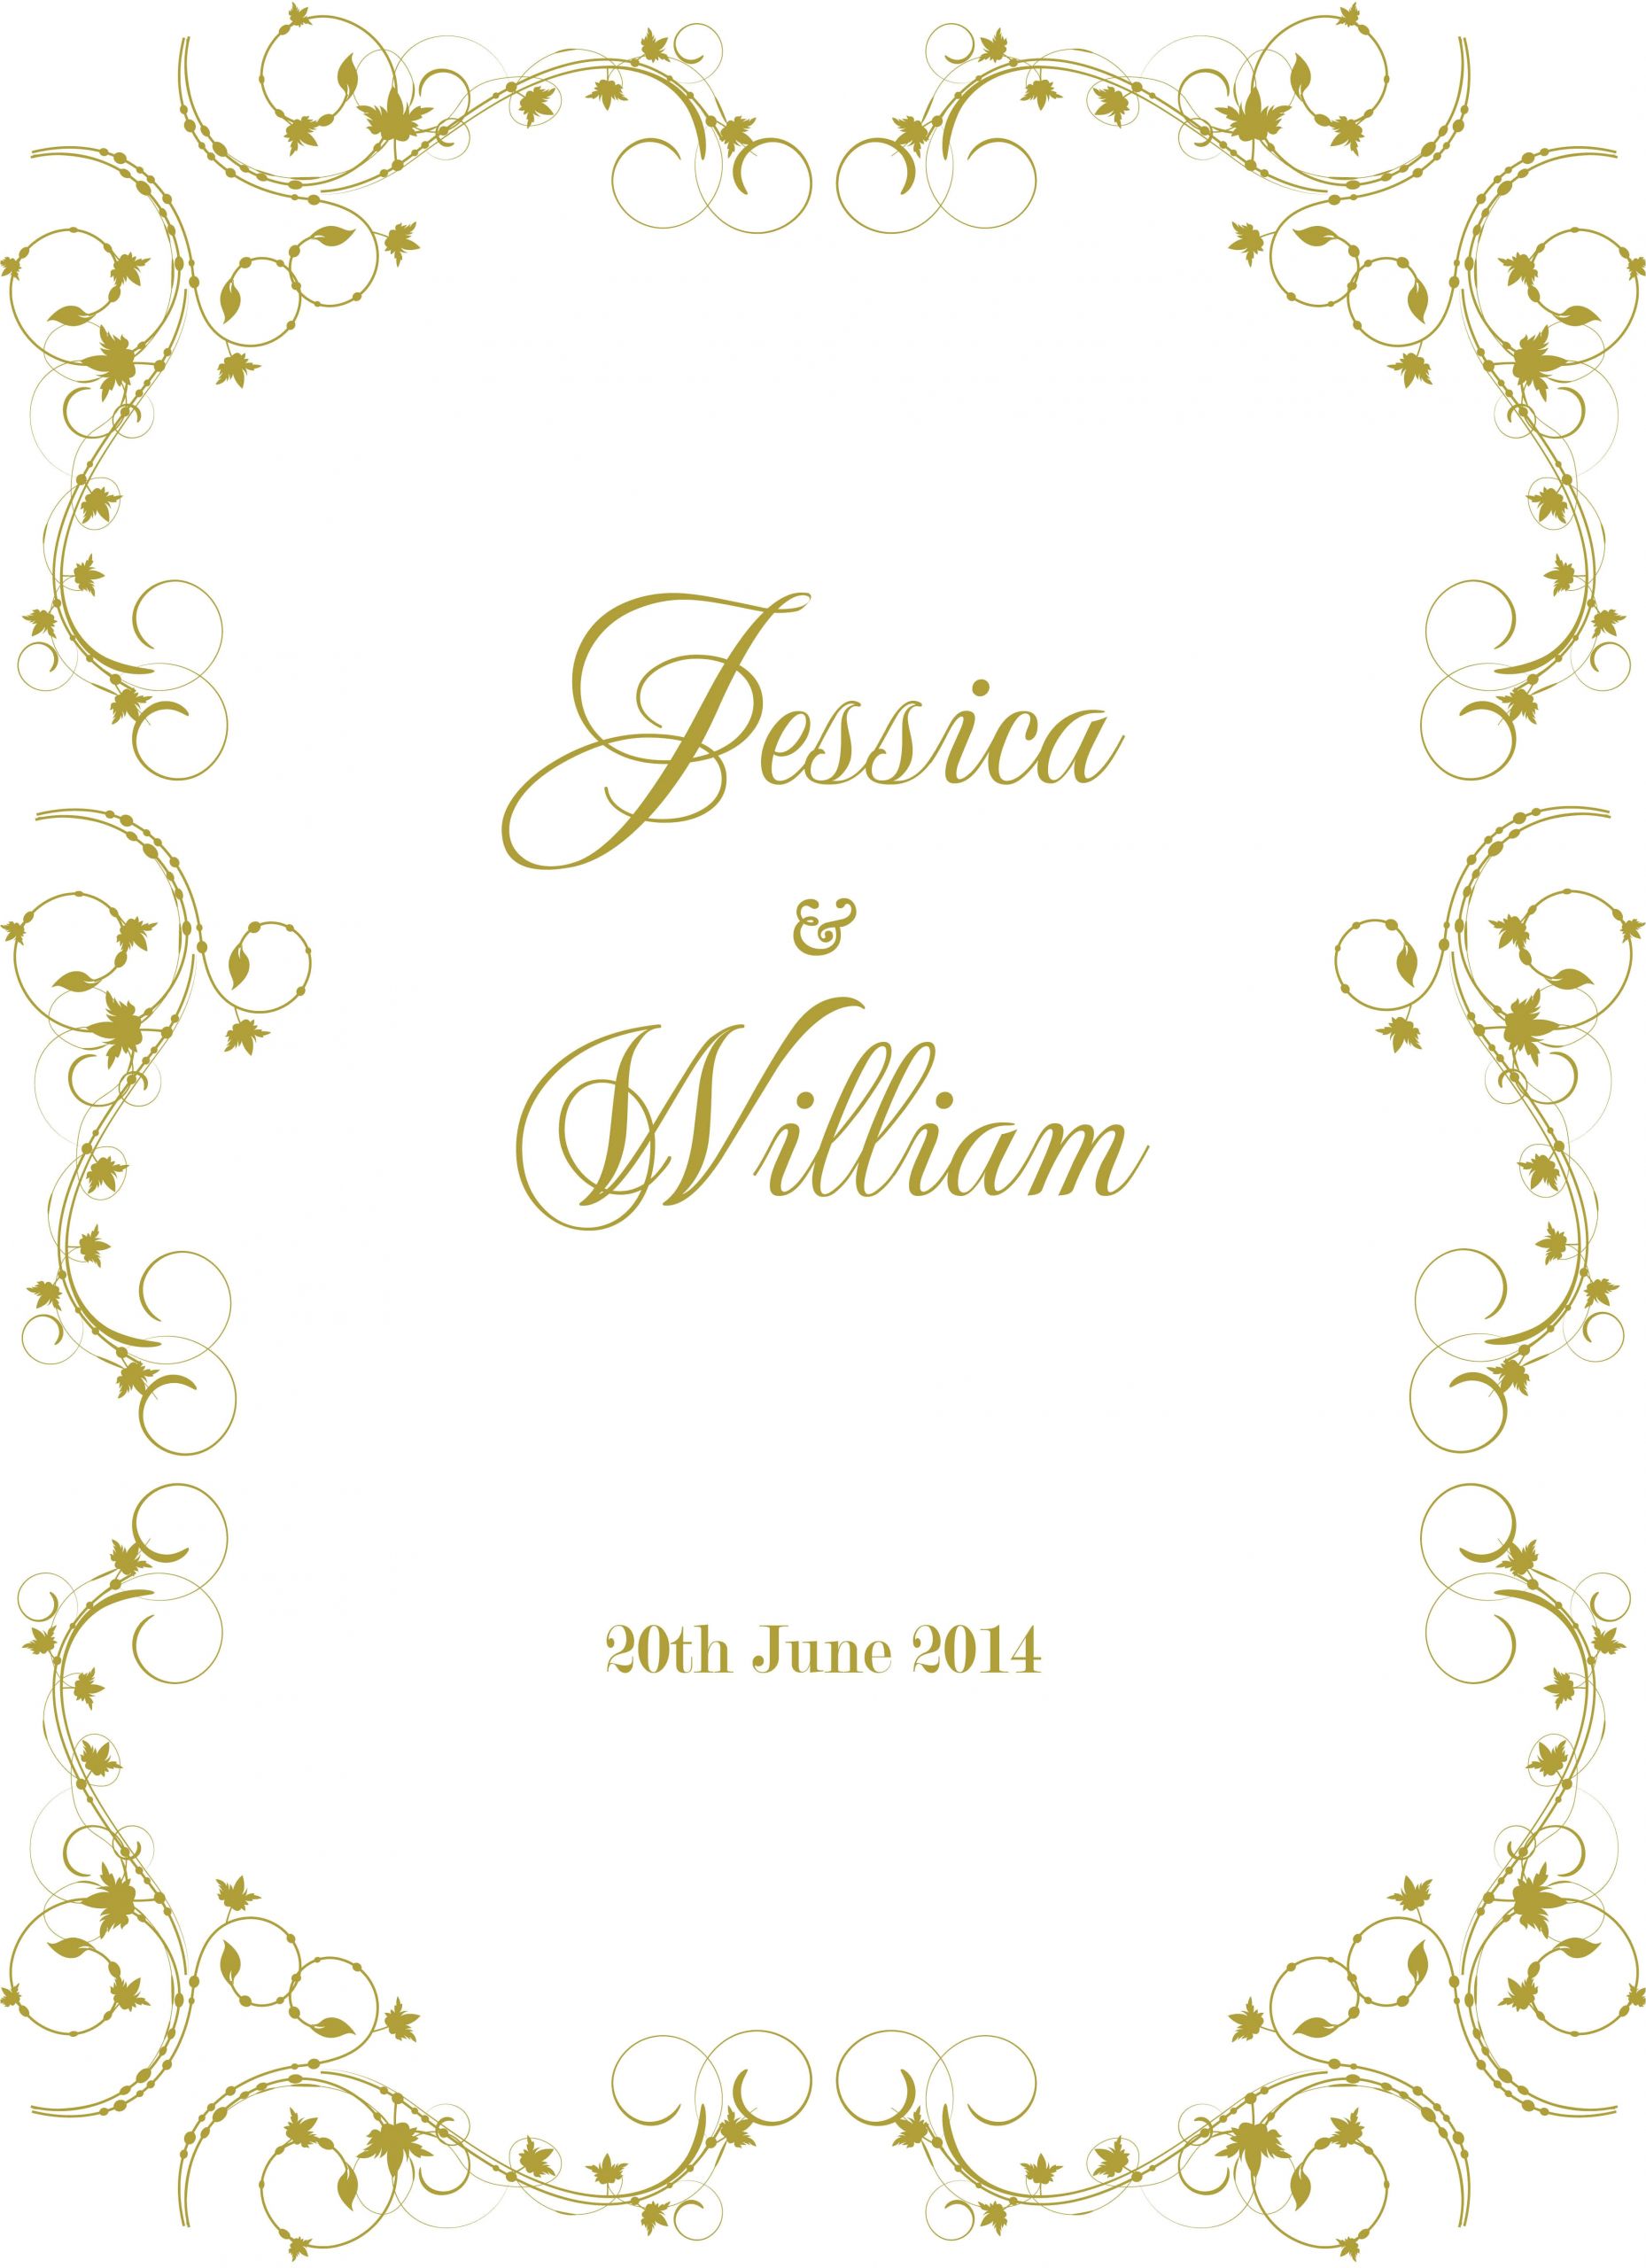 Border Images for Wedding Card Wedding Border Designs with Images Photo Wedding